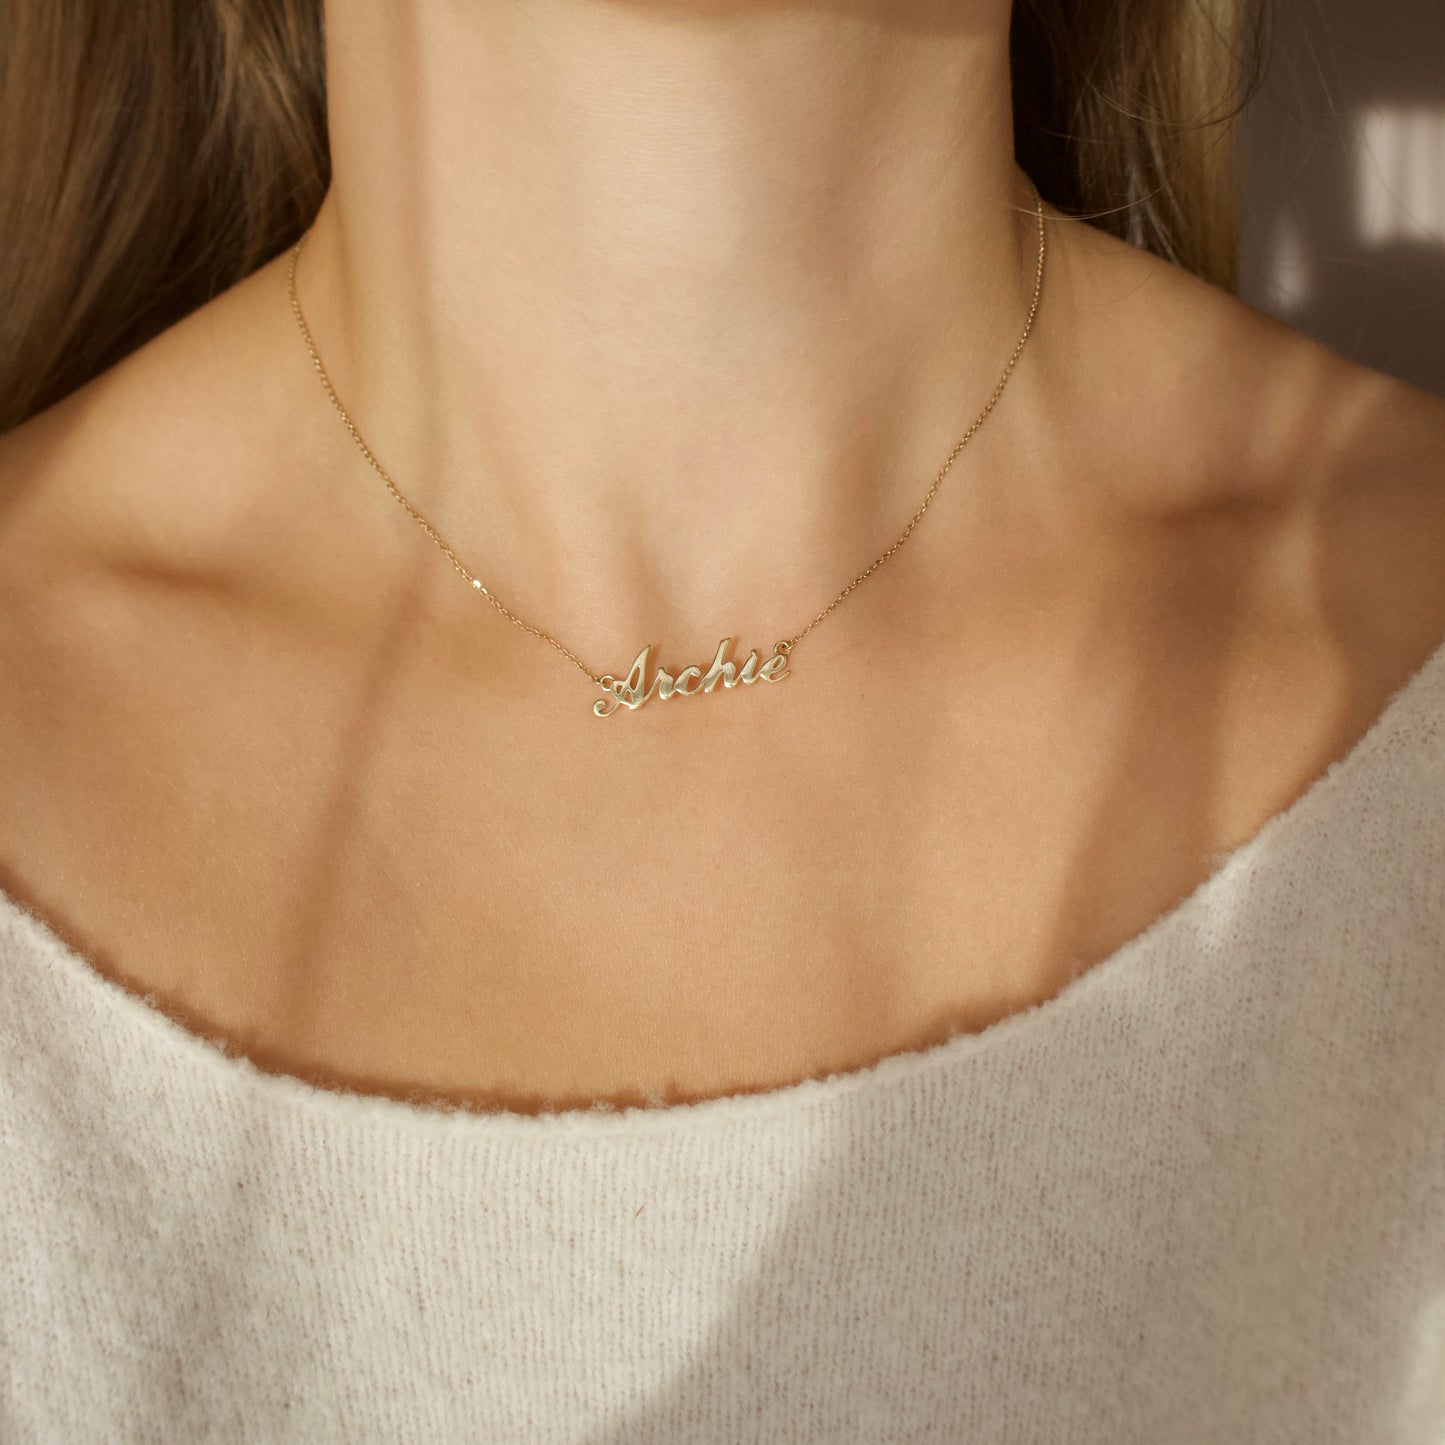 SAMPLE SALE - Archie Name Necklace in 9k Solid Yellow Gold